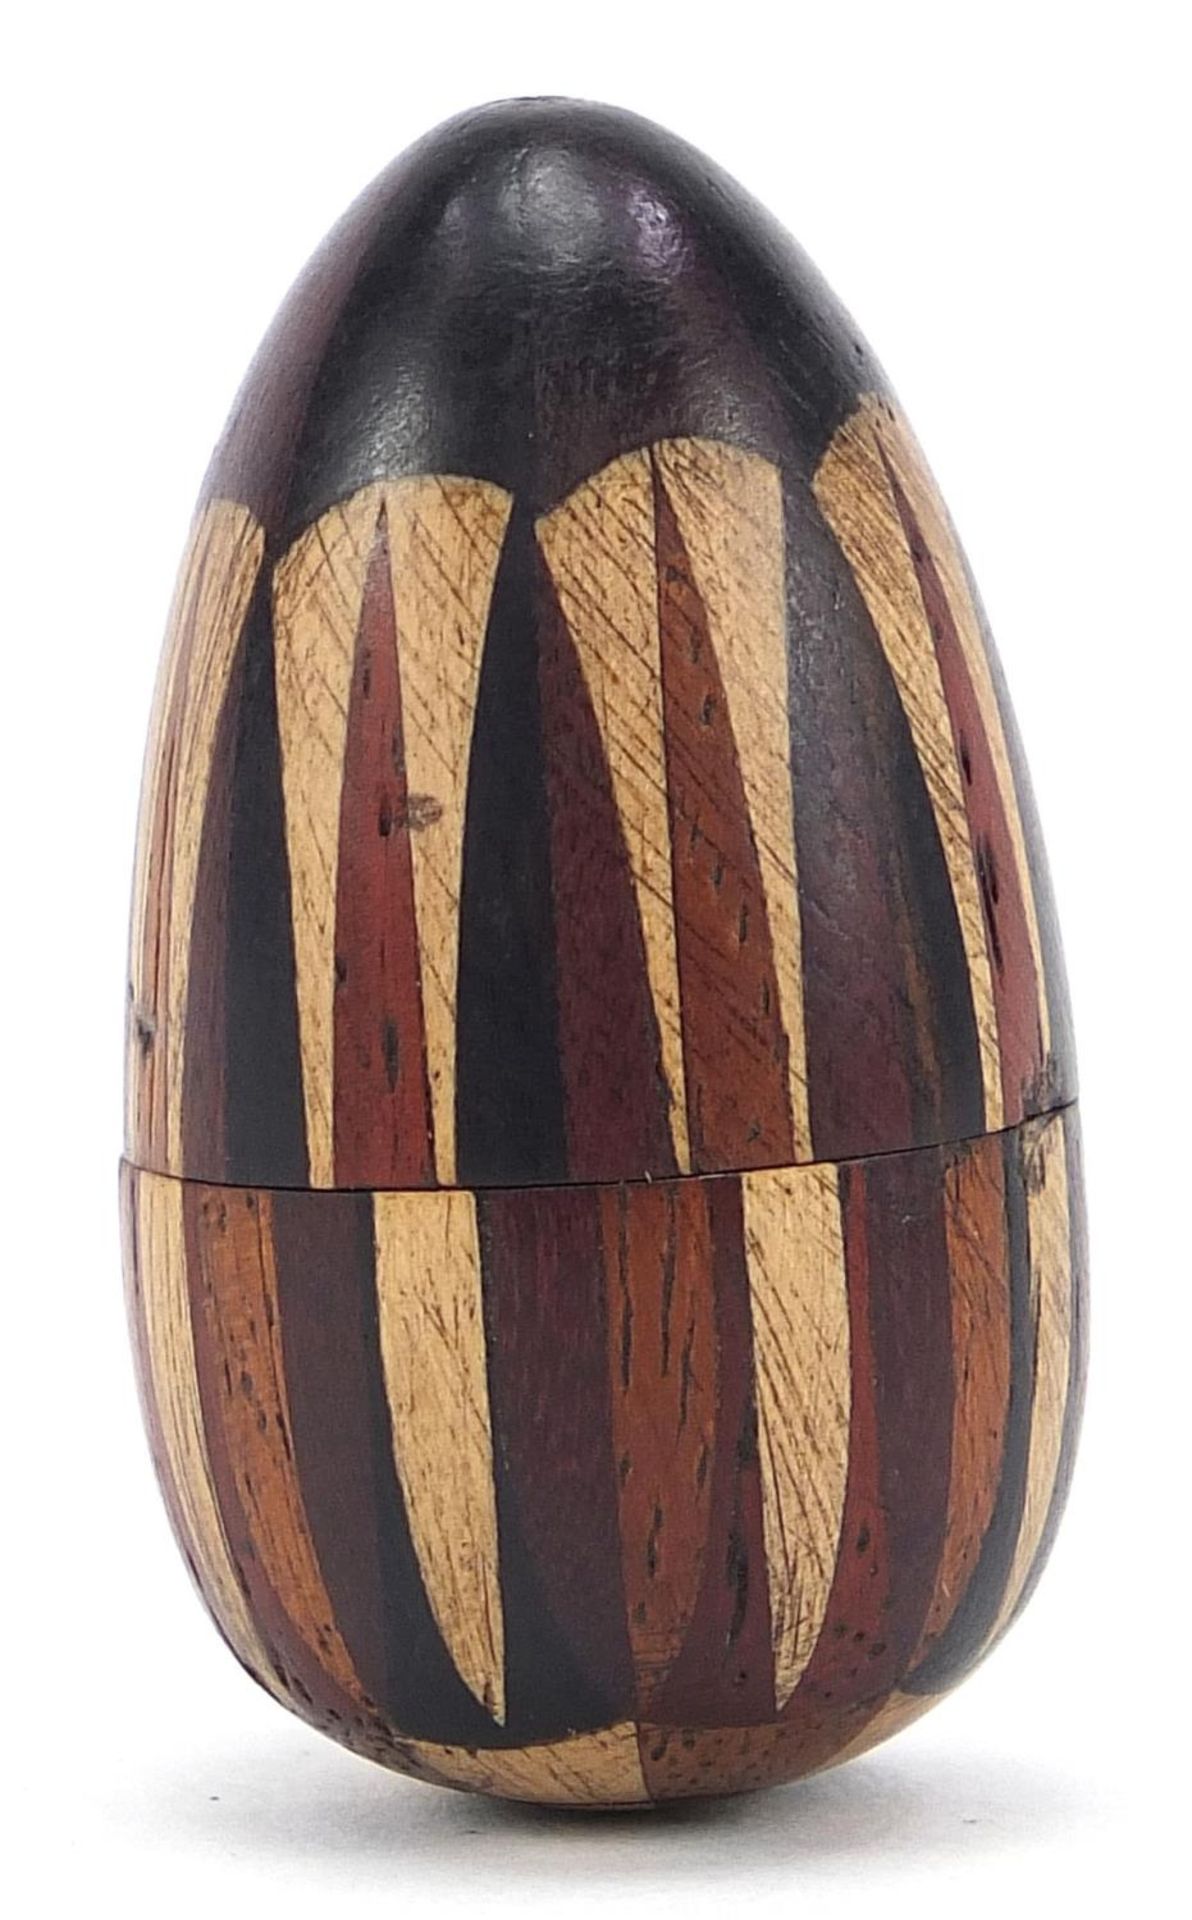 Victorian sewing interest Tunbridge stick ware thimble holder in the form of an egg, 4.5cm high :For